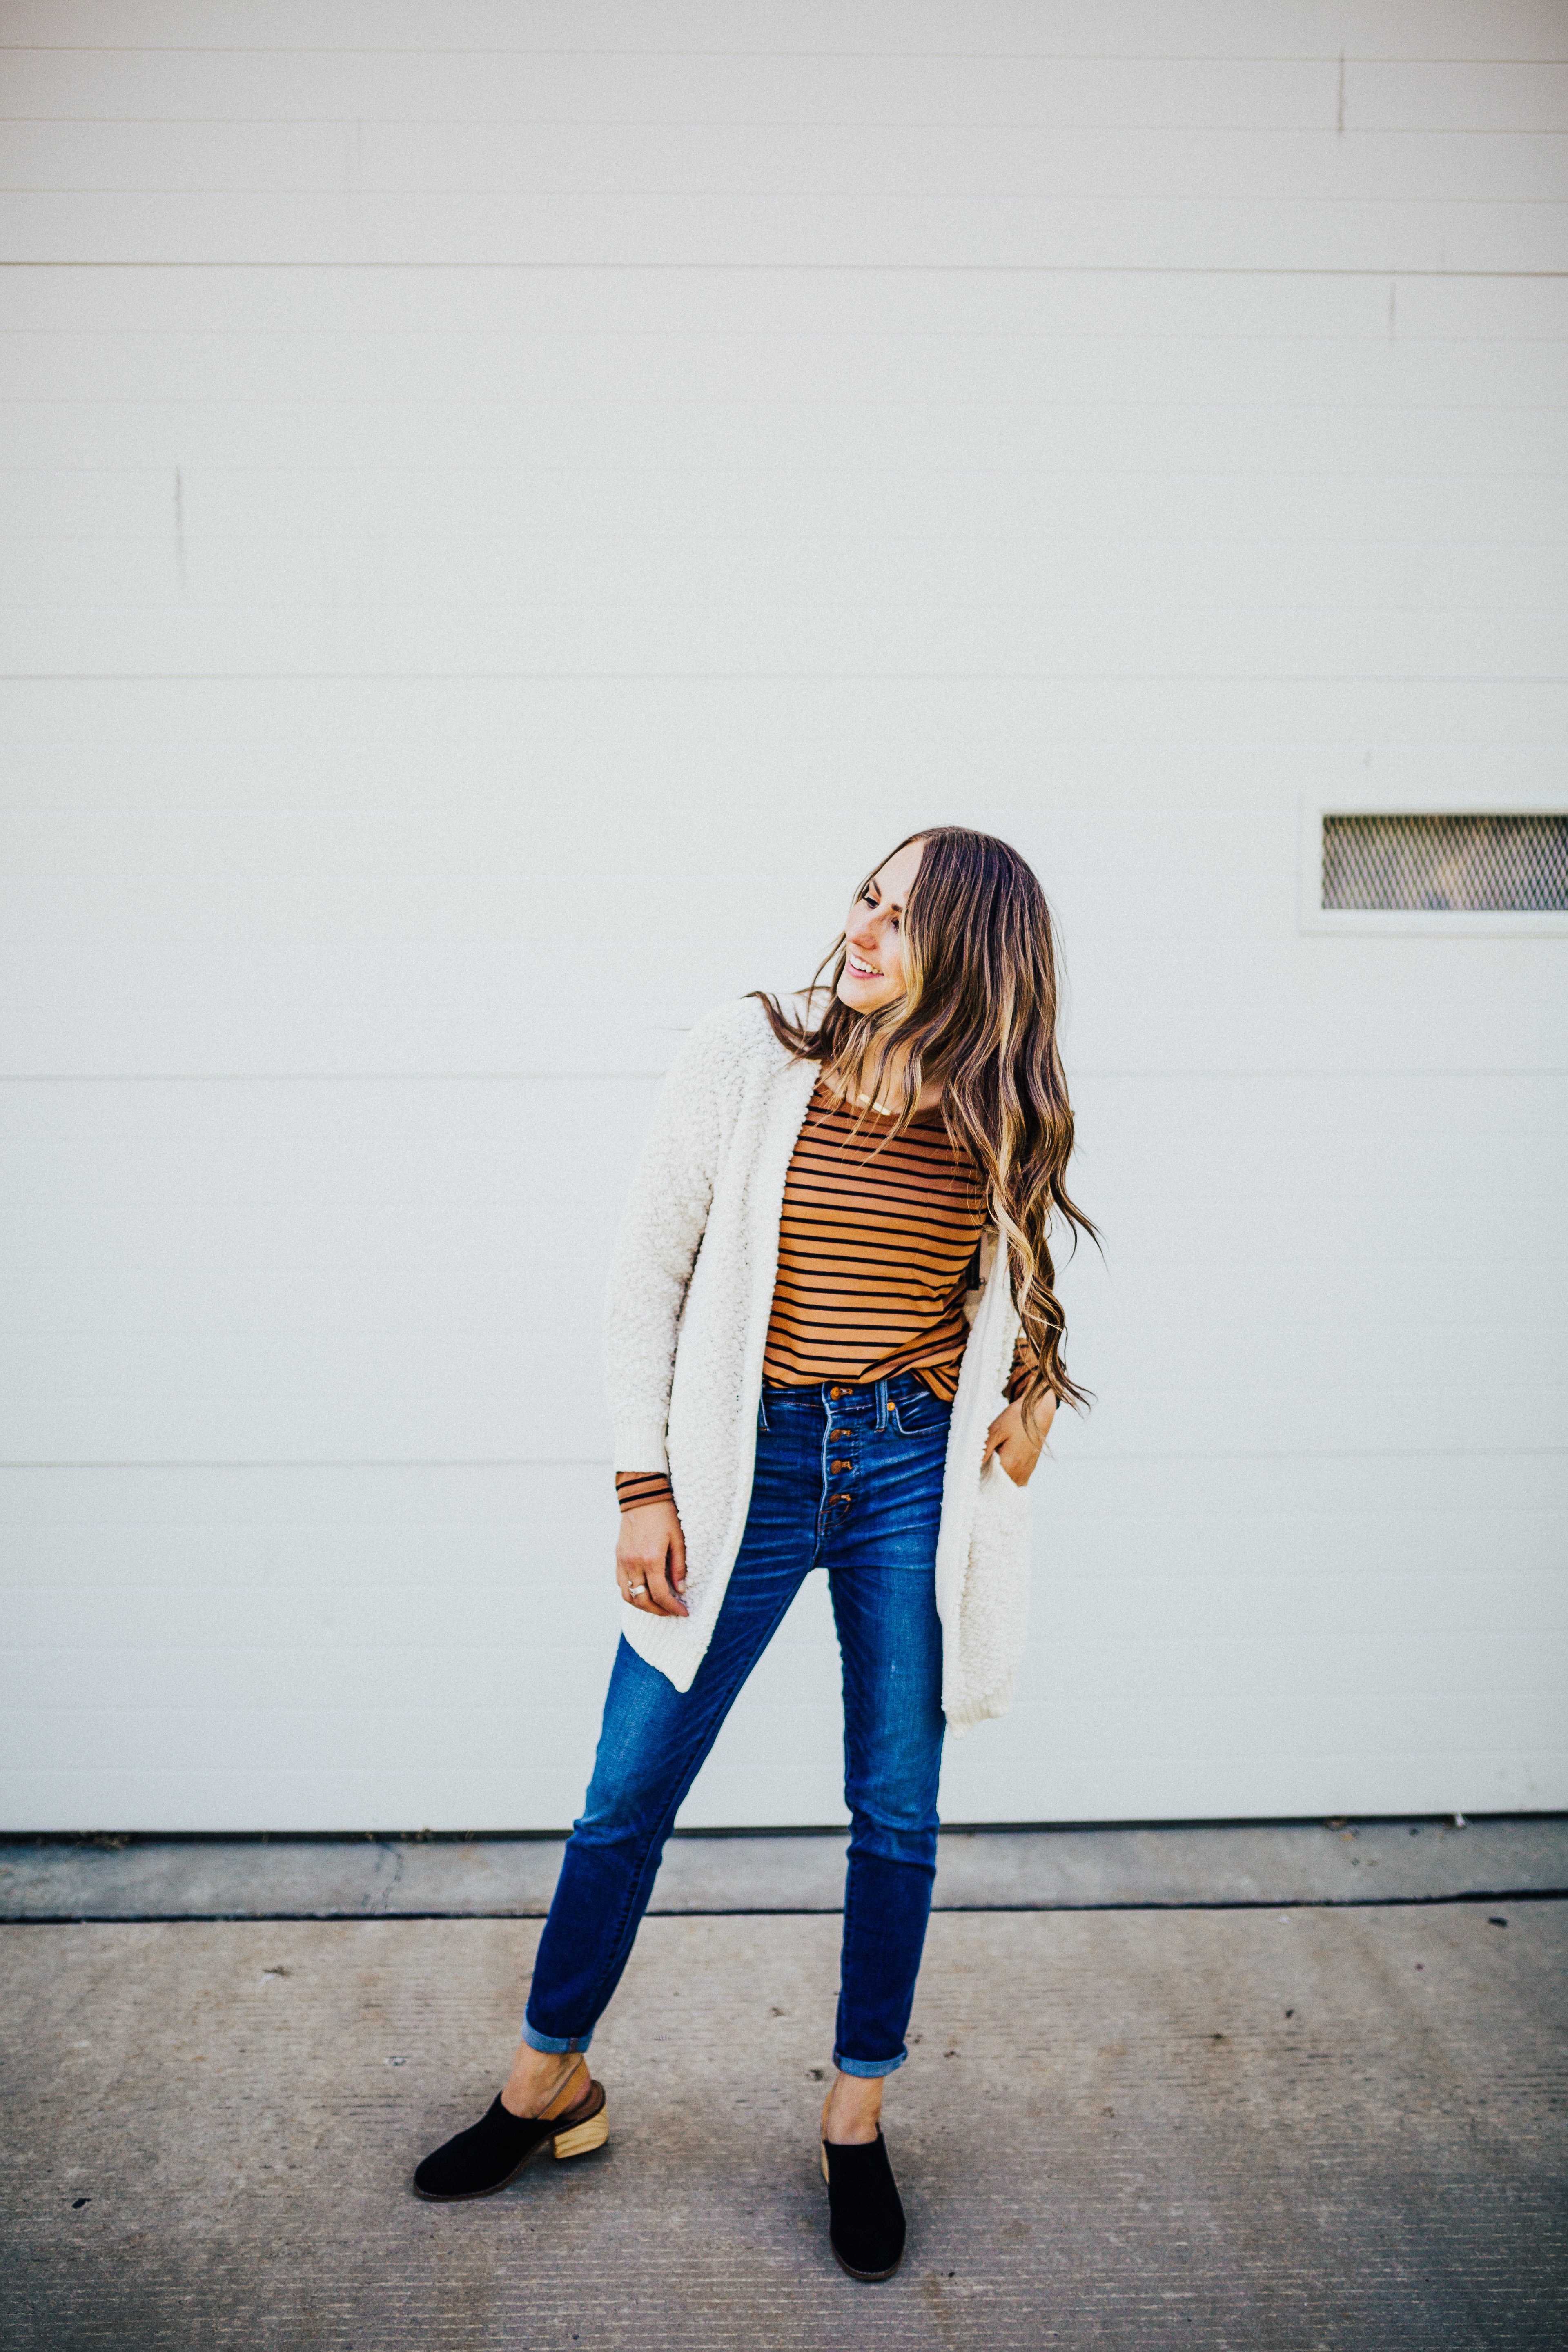 Curious how to rock a stripe tee year round? Utah Style Blogger Dani Marie is sharing her favorite 3 ways to wearing a stripe tee!